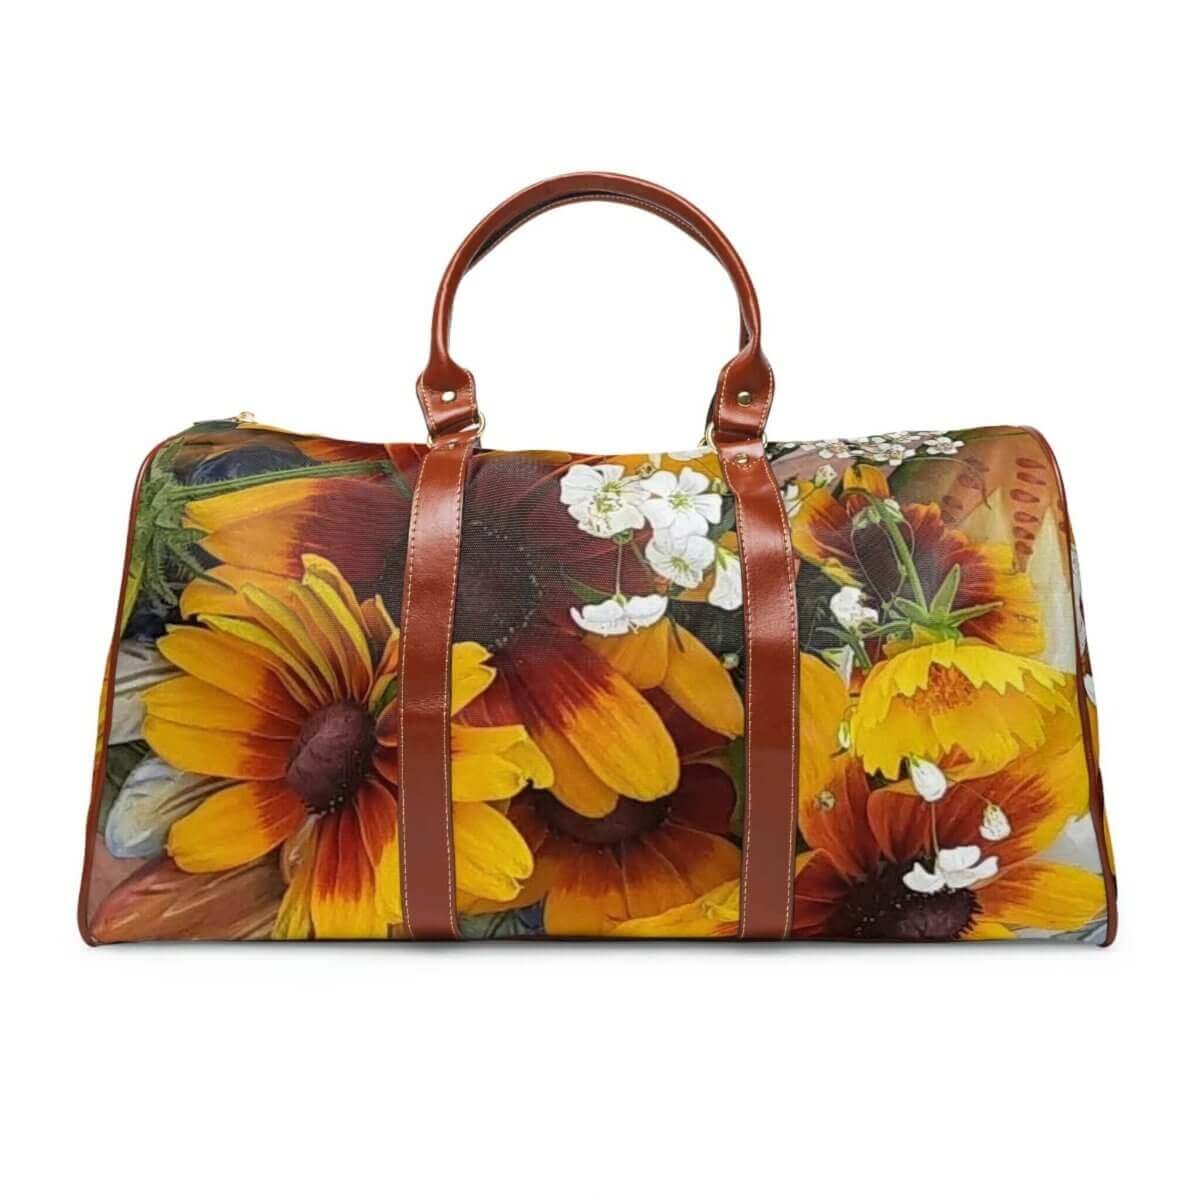 Our Bouquet Design Waterproof Travel Bag - Hearth Home & Living